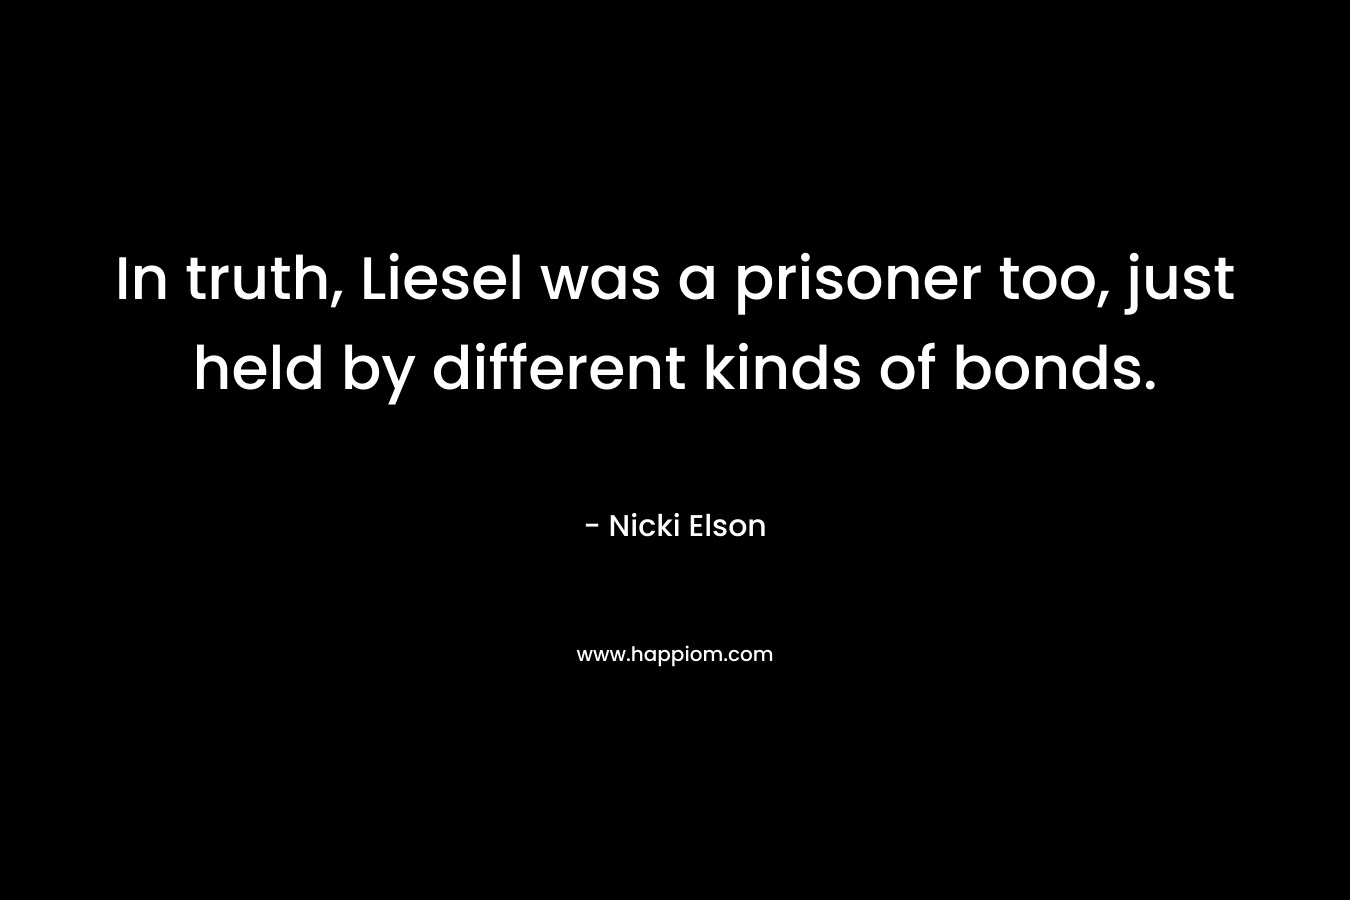 In truth, Liesel was a prisoner too, just held by different kinds of bonds.